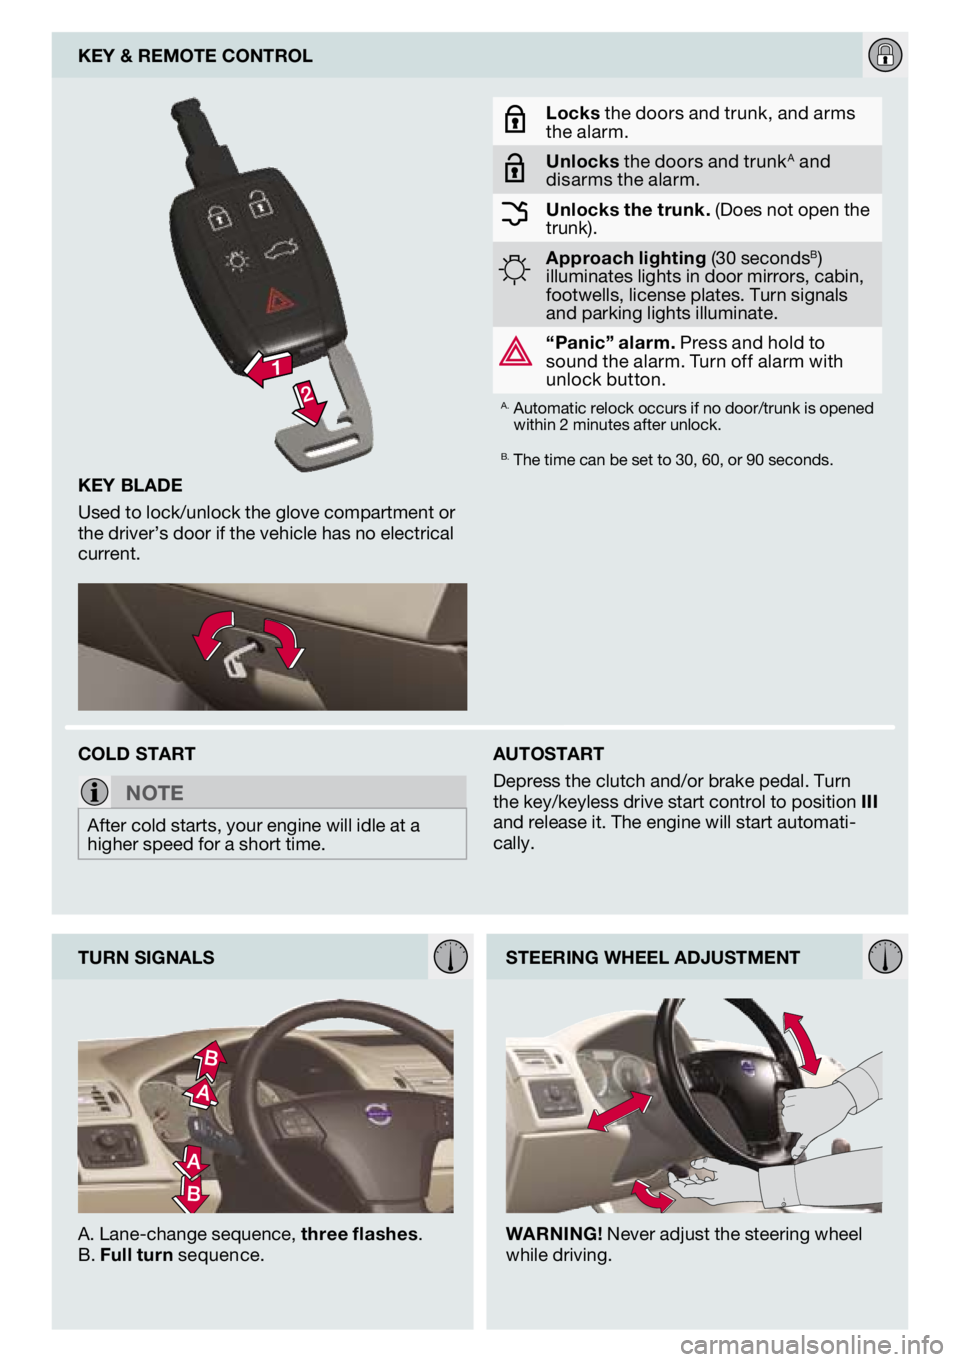 VOLVO S40 2009  Quick Guide 
AUTOSTART
Depress the clutch and/or brake pedal. Turn the key/keyless drive start control to position III and release it. The engine will start automati-cally. 
key blAde
Used to lock/unlock the glov